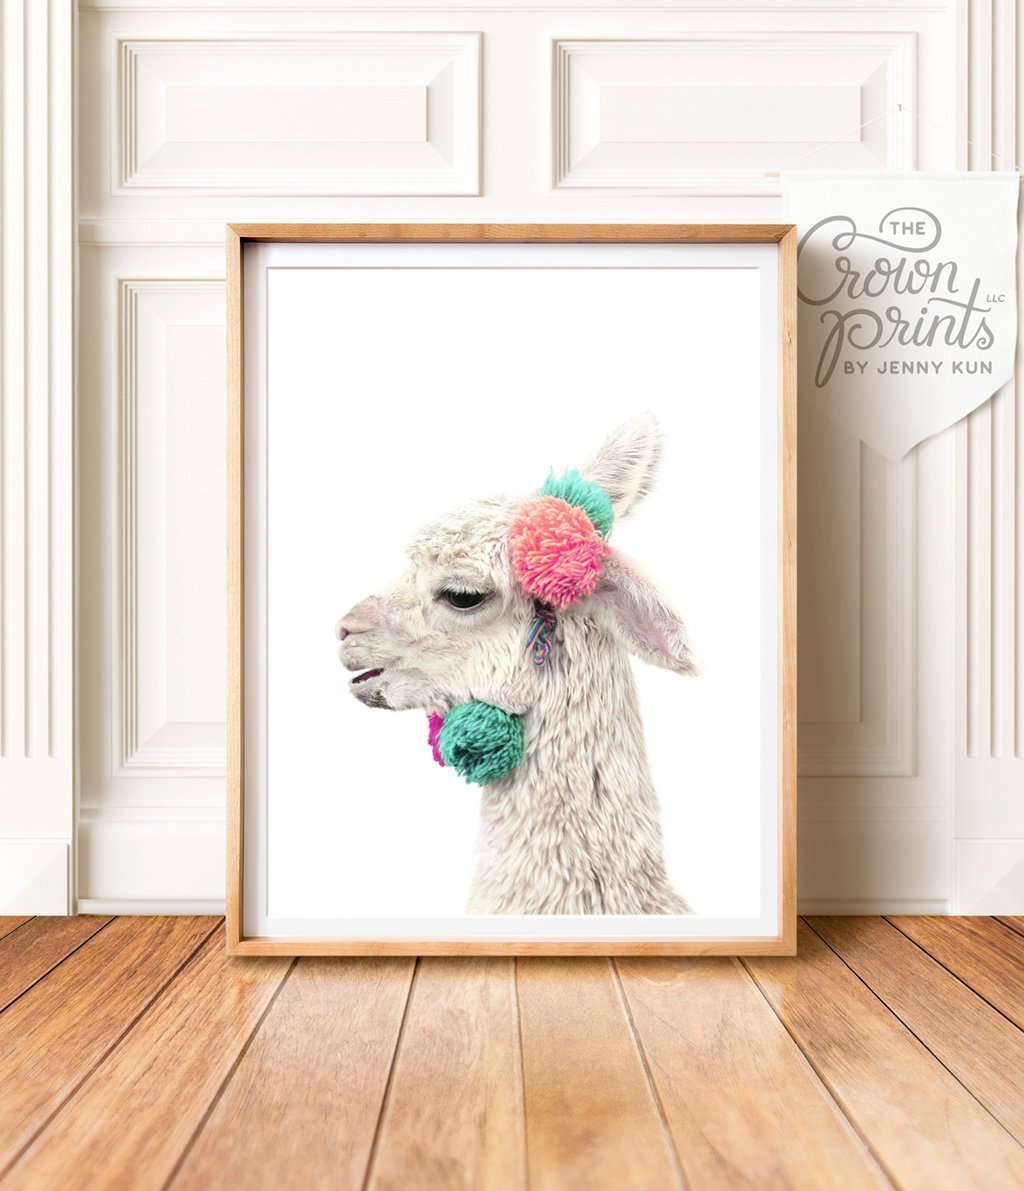 Decorated Llama (white background) - The Crown Prints